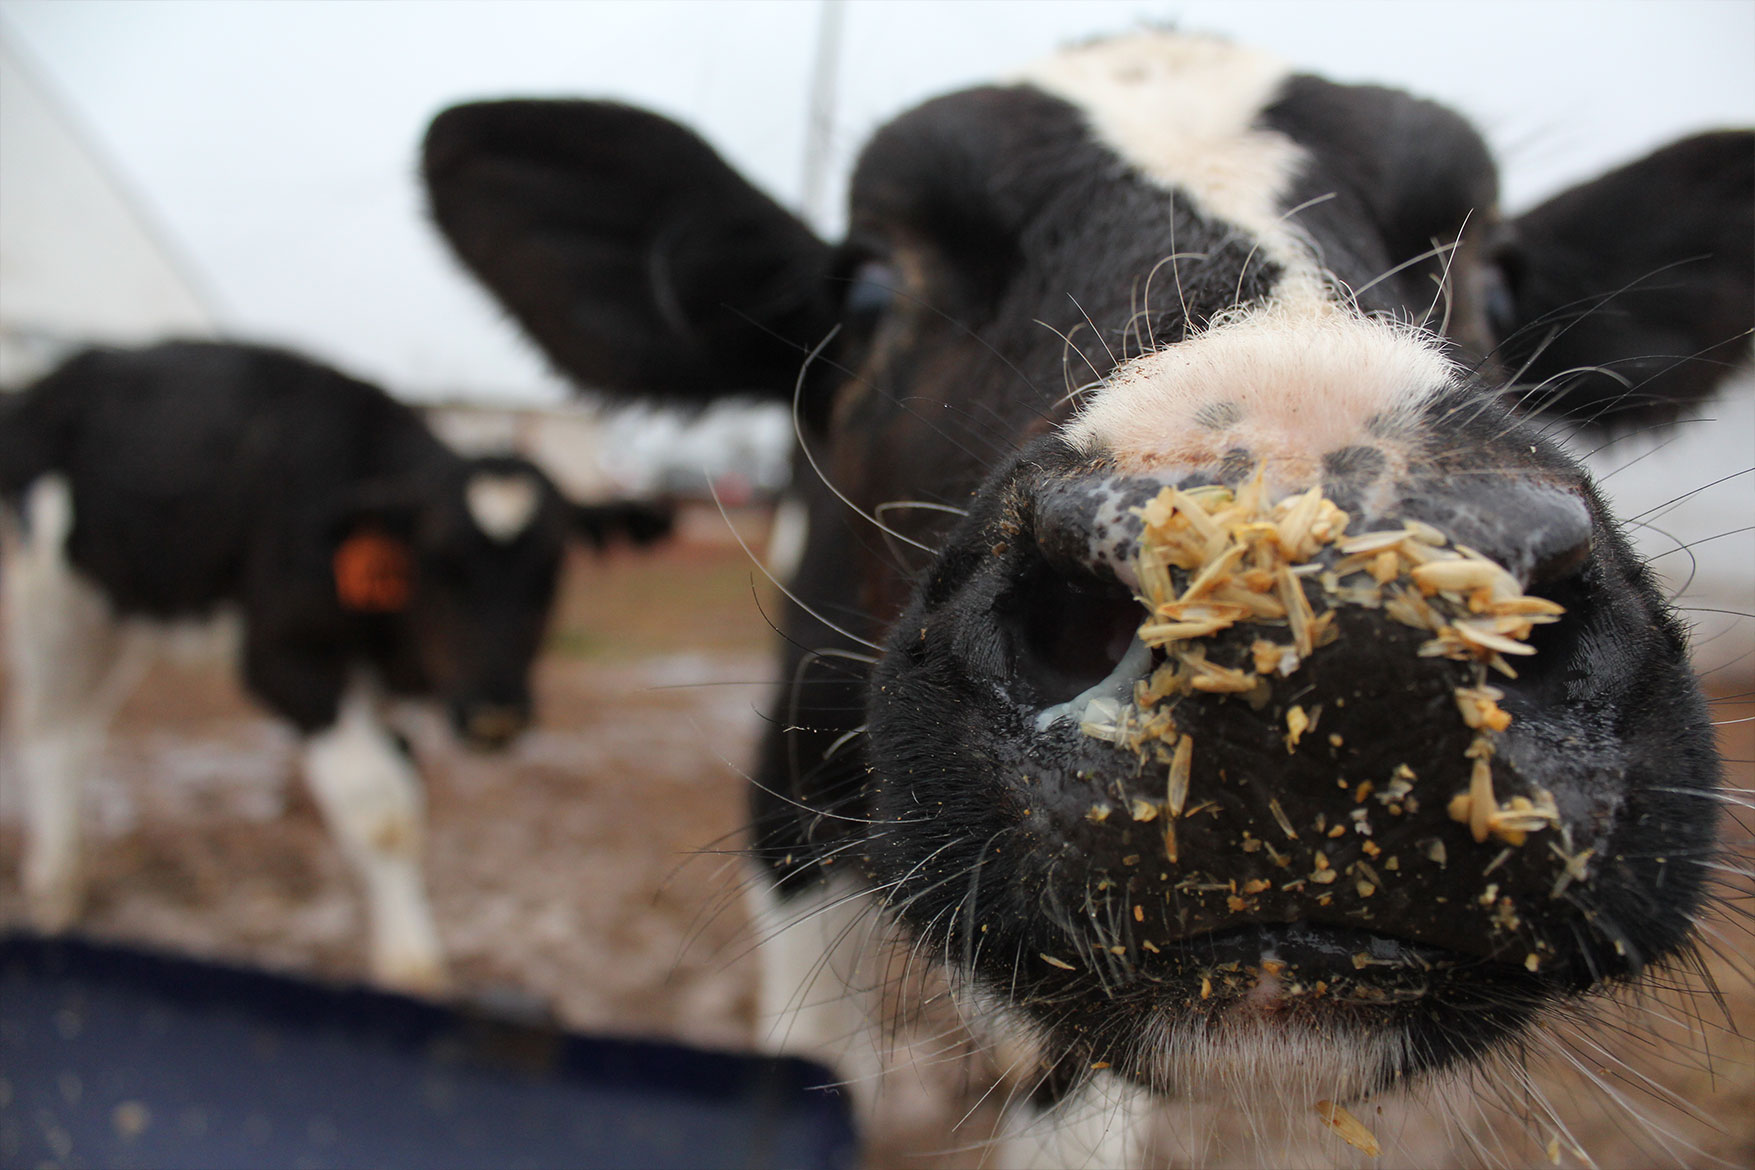 A calf at M6 Dairy sniffs the camera.